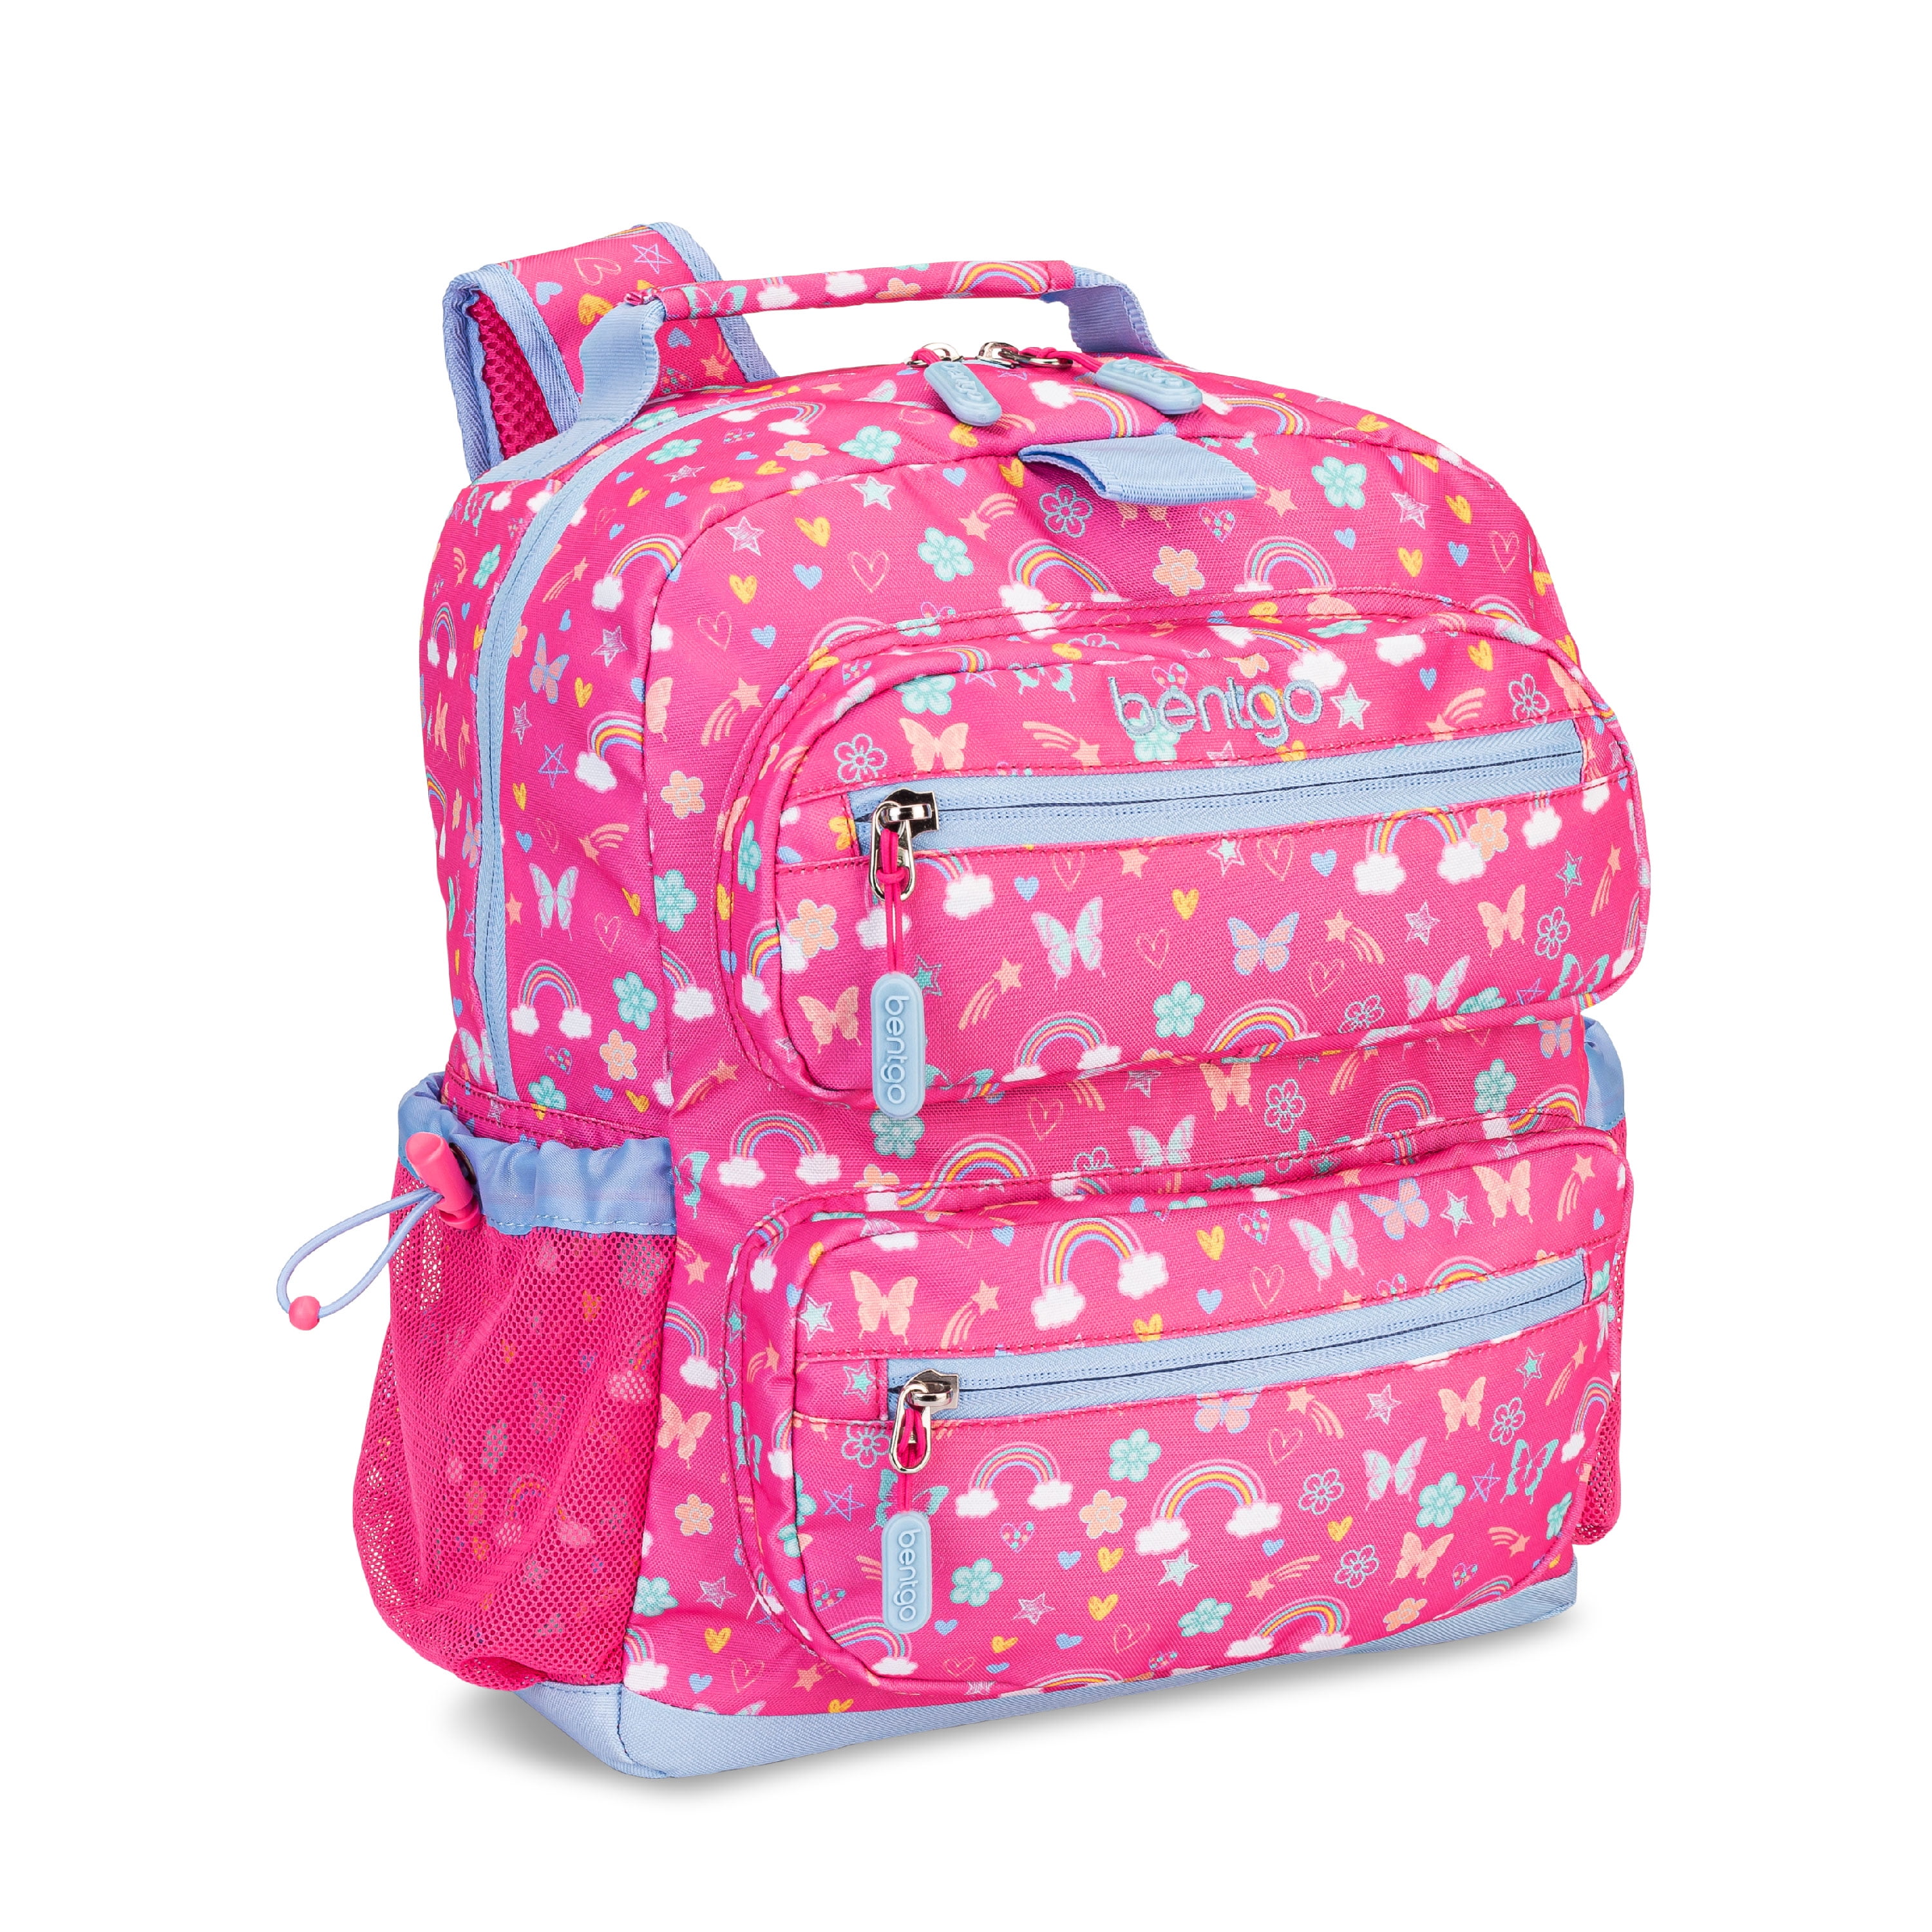 Bentgo® Kids Backpack - Confetti Edition Designed Lightweight 14” Backpack  for School, Travel & Daycare - Roomy Interior, Durable & Water-Resistant